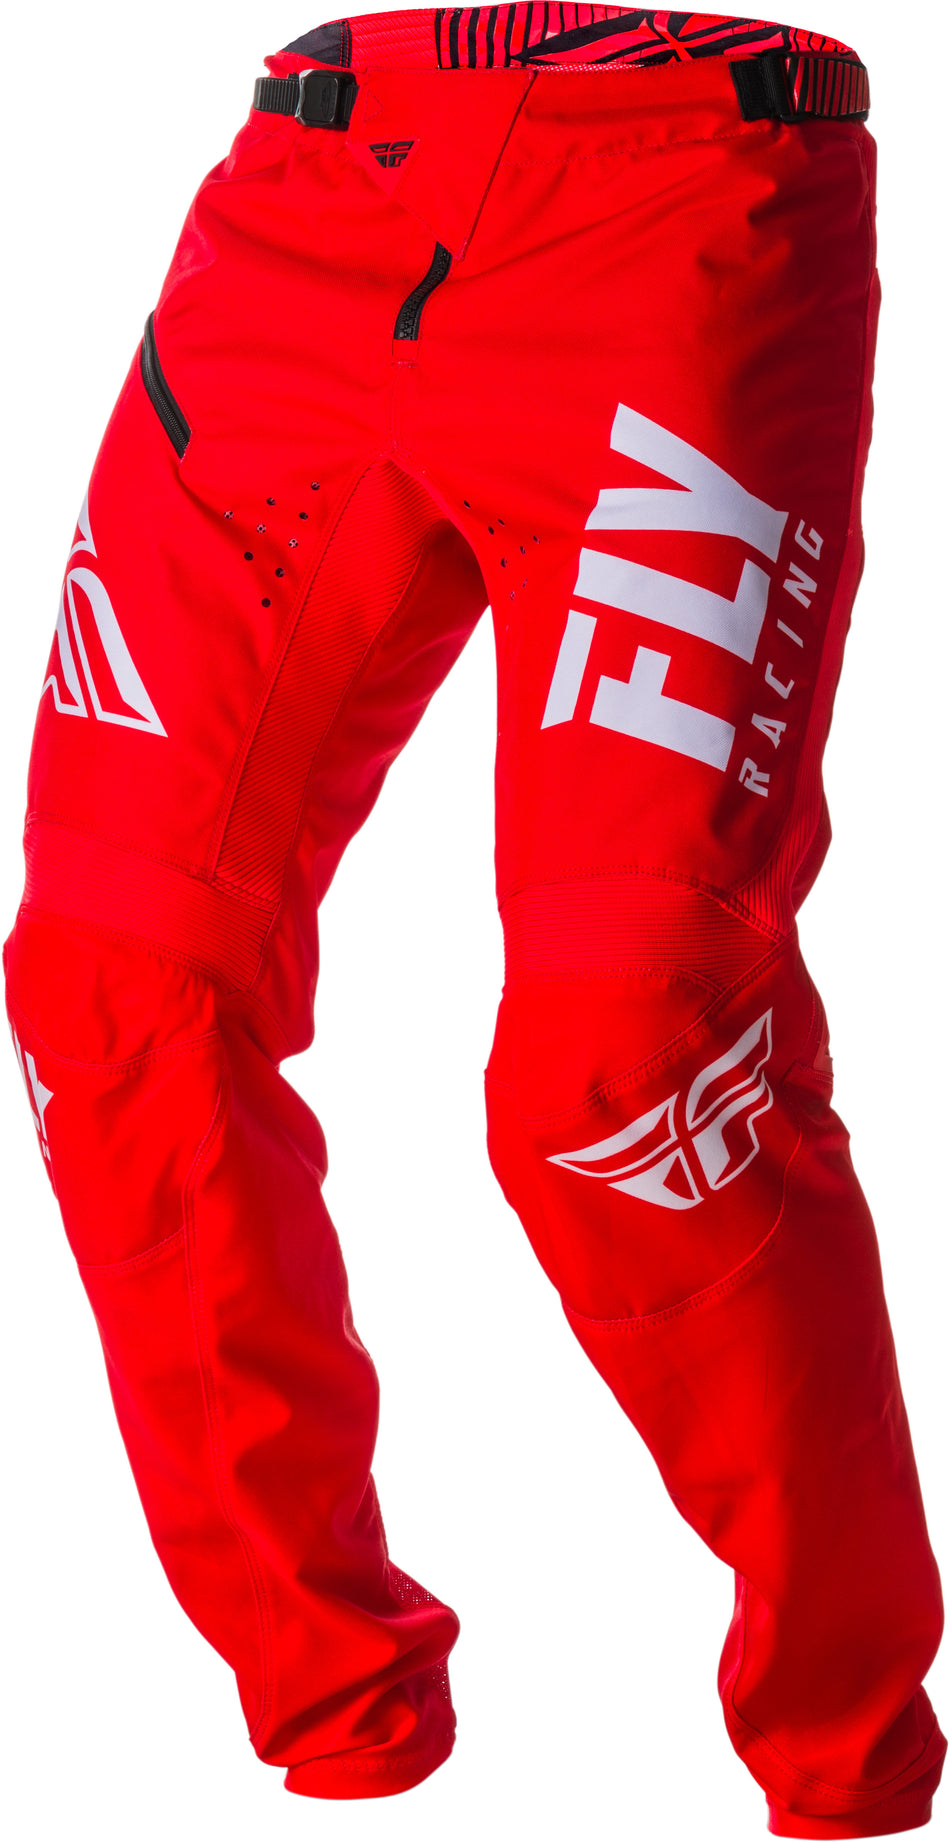 FLY RACING Kinetic Shield Bicycle Pants Red/White Sz 34 372-02234